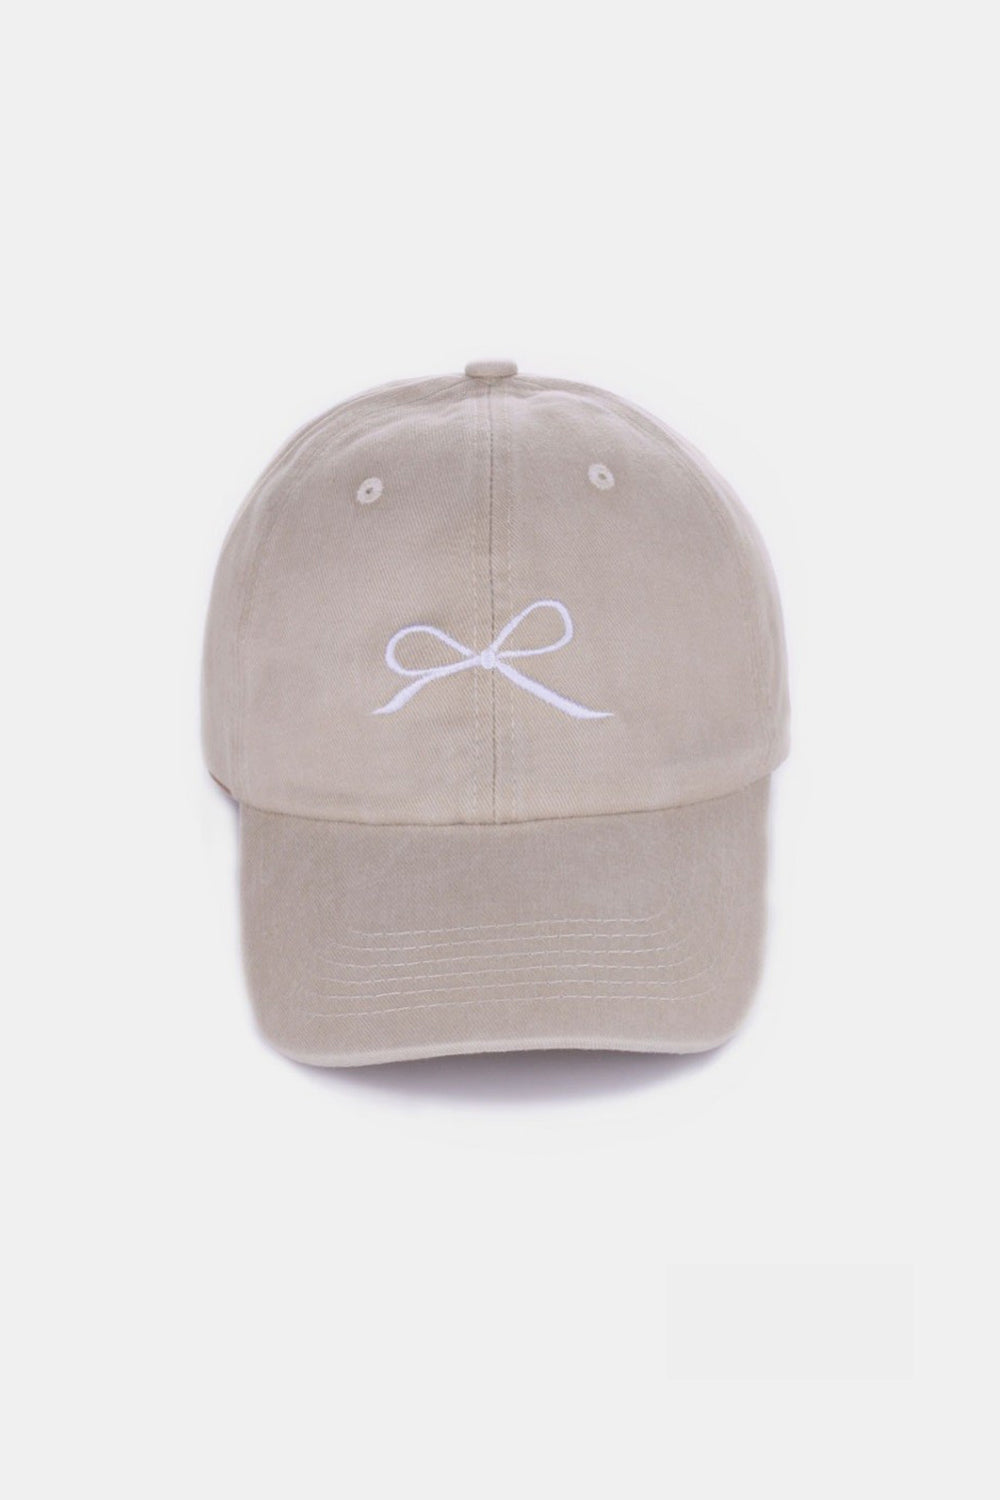 White Smoke Zenana Bow Embroidered Washed Cotton Caps Sentient Beauty Fashions Apparel & Accessories